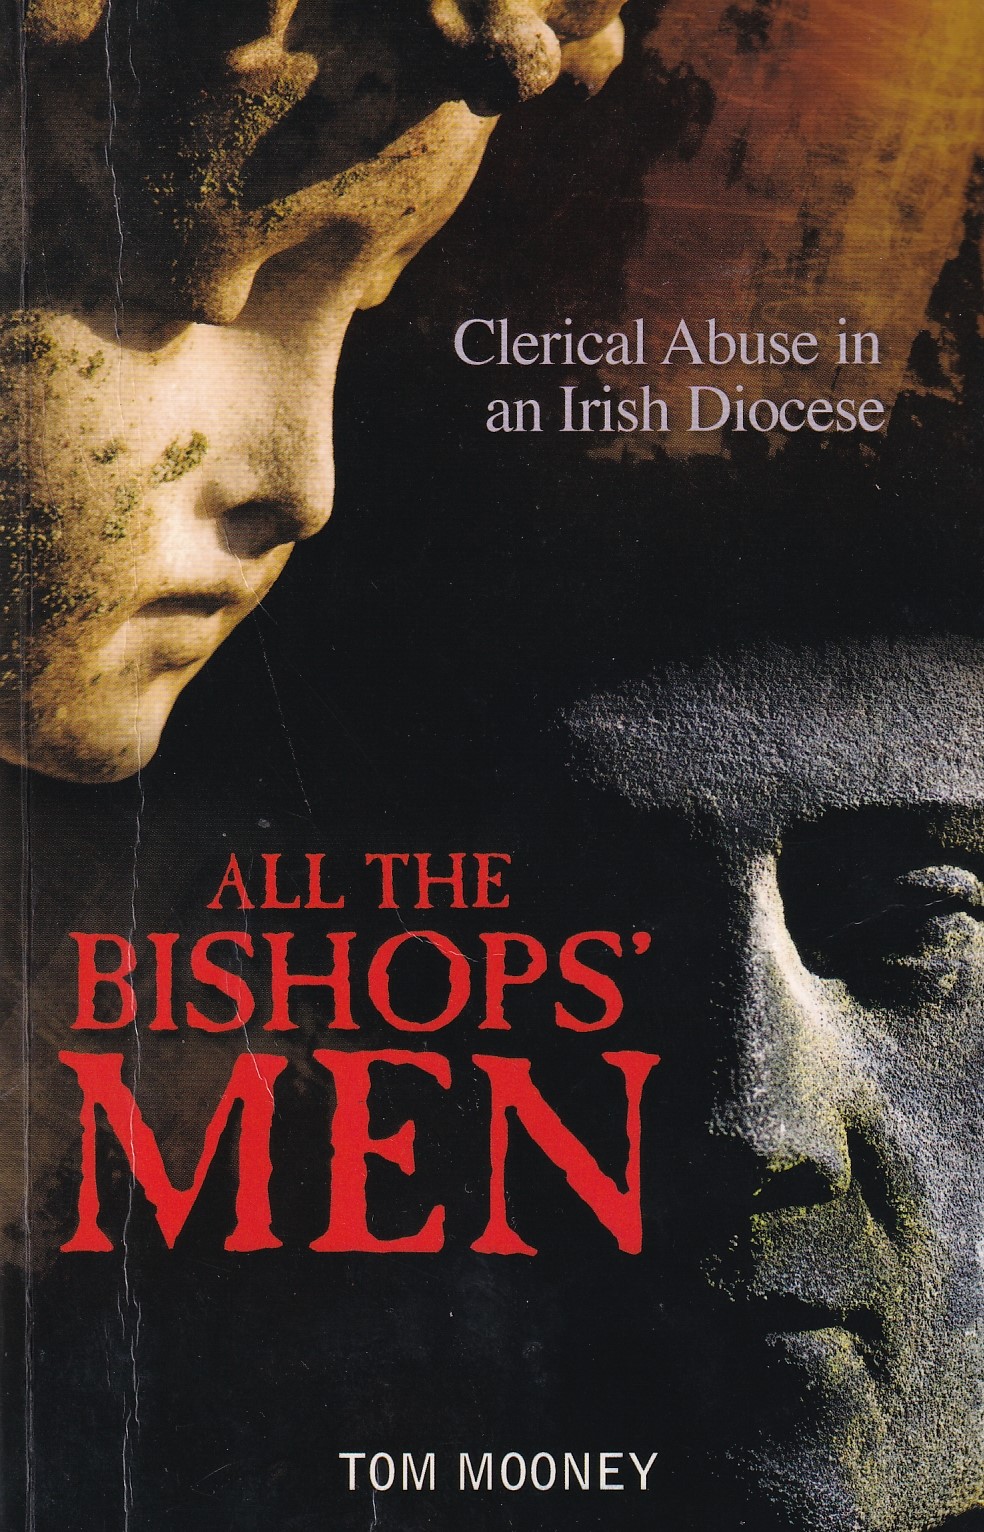 All the Bishops’ Men: Clerical Abuse in an Irish Diocese | Tom Mooney | Charlie Byrne's